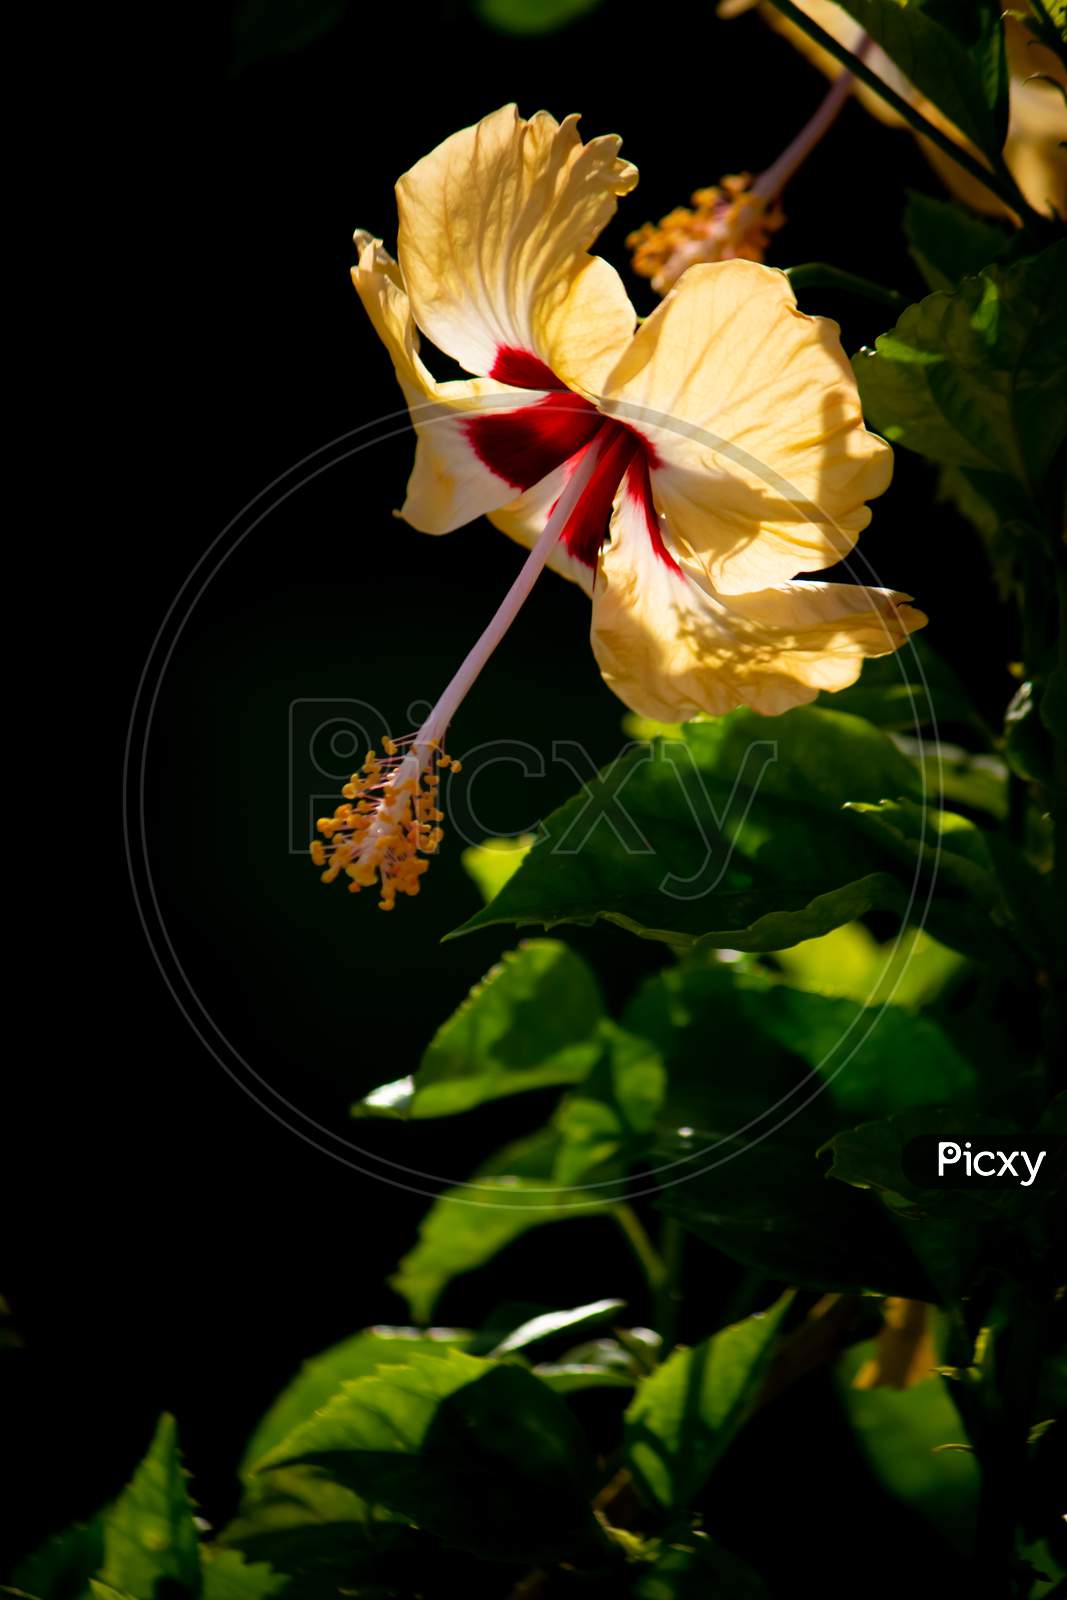 Yellwo Hibiscus Rosa-Sinensis, Colloquially As Chinese Hibiscus, China Rose, Hawaiian Hibiscus, Rose Mallow & Shoeblackplant, Is A Species Of Tropical Hibiscus, Hibisceae Tribe Of The Family Malvaceae